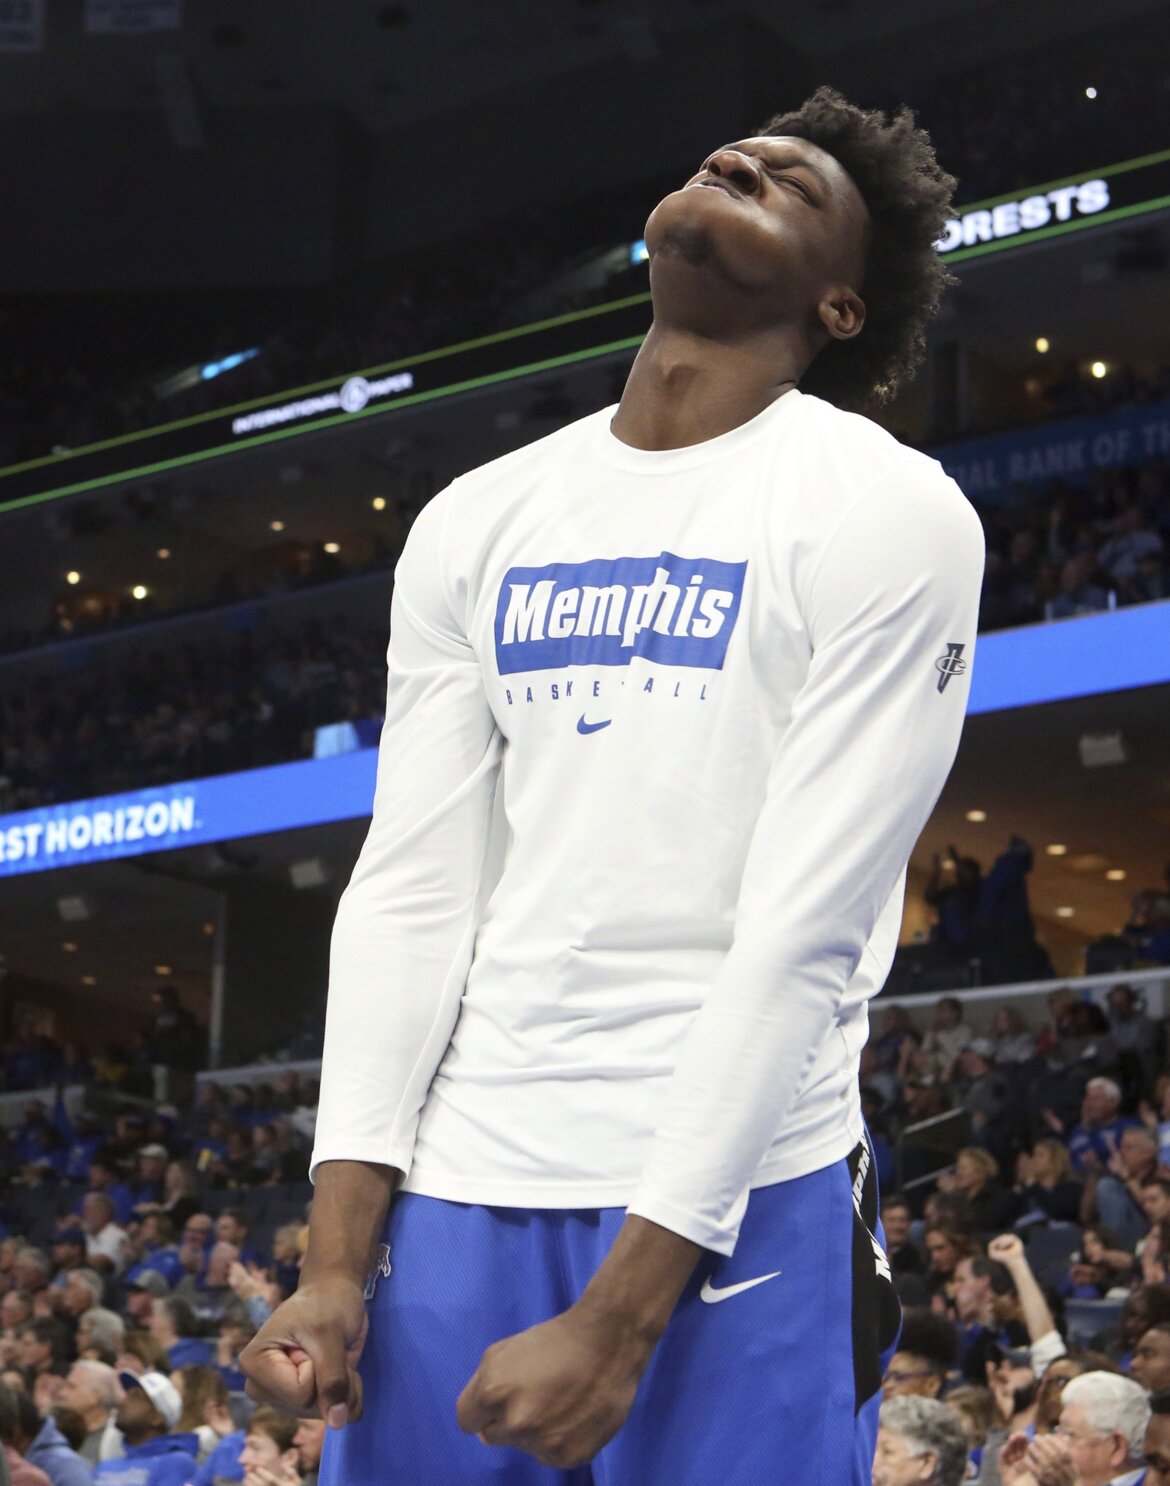 James Wiseman, Memphis center and possible No. 1 NBA draft pick, ruled  ineligible by NCAA 